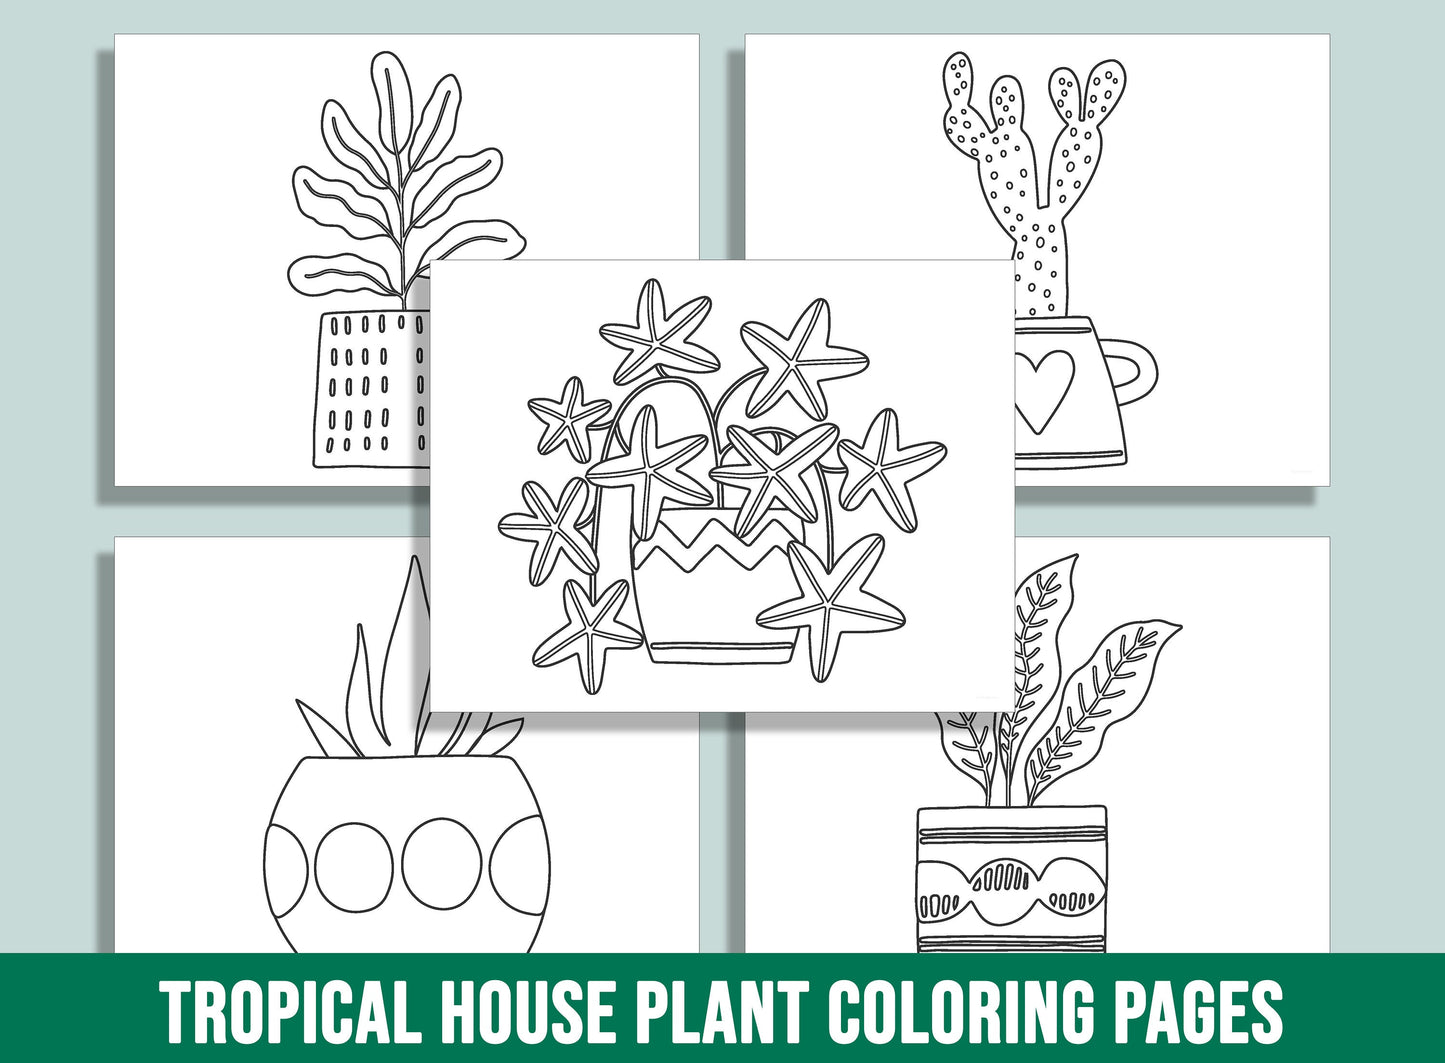 30 Tropical House Plant Coloring Pages: A Botanical Paradise to Color, PDF File, Instant Download